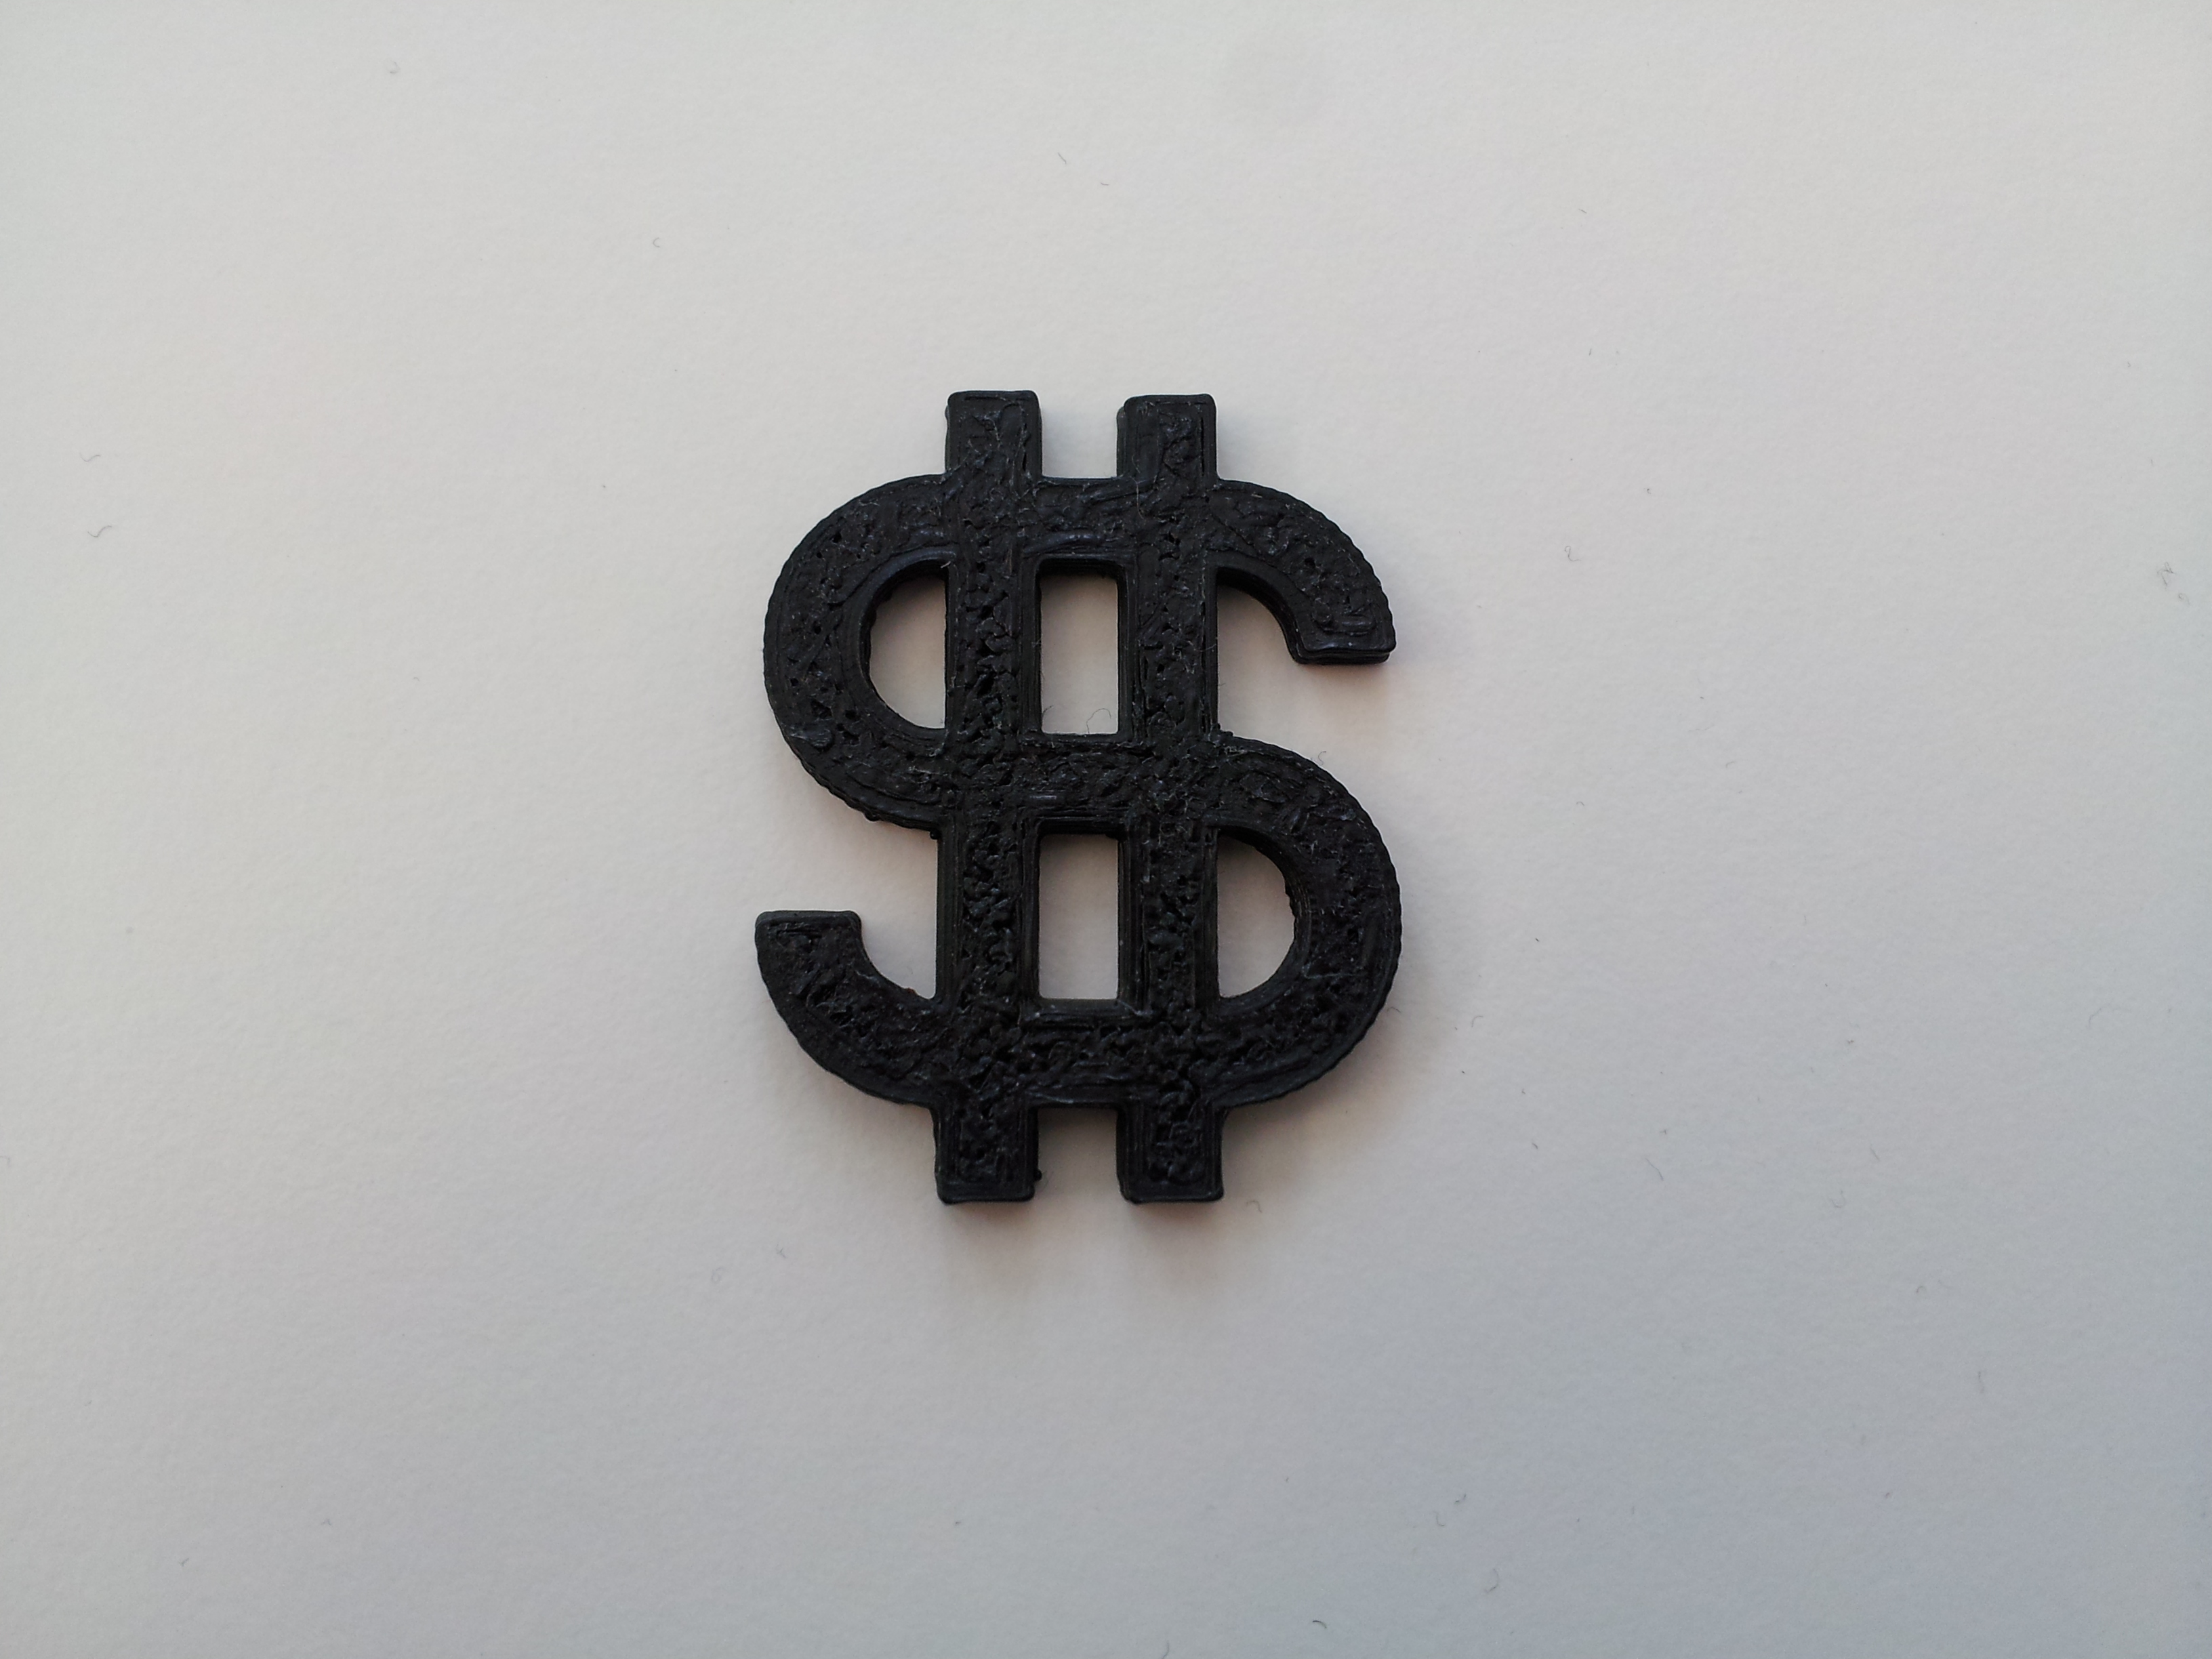 SimScale offices - 3D printed dollar sign